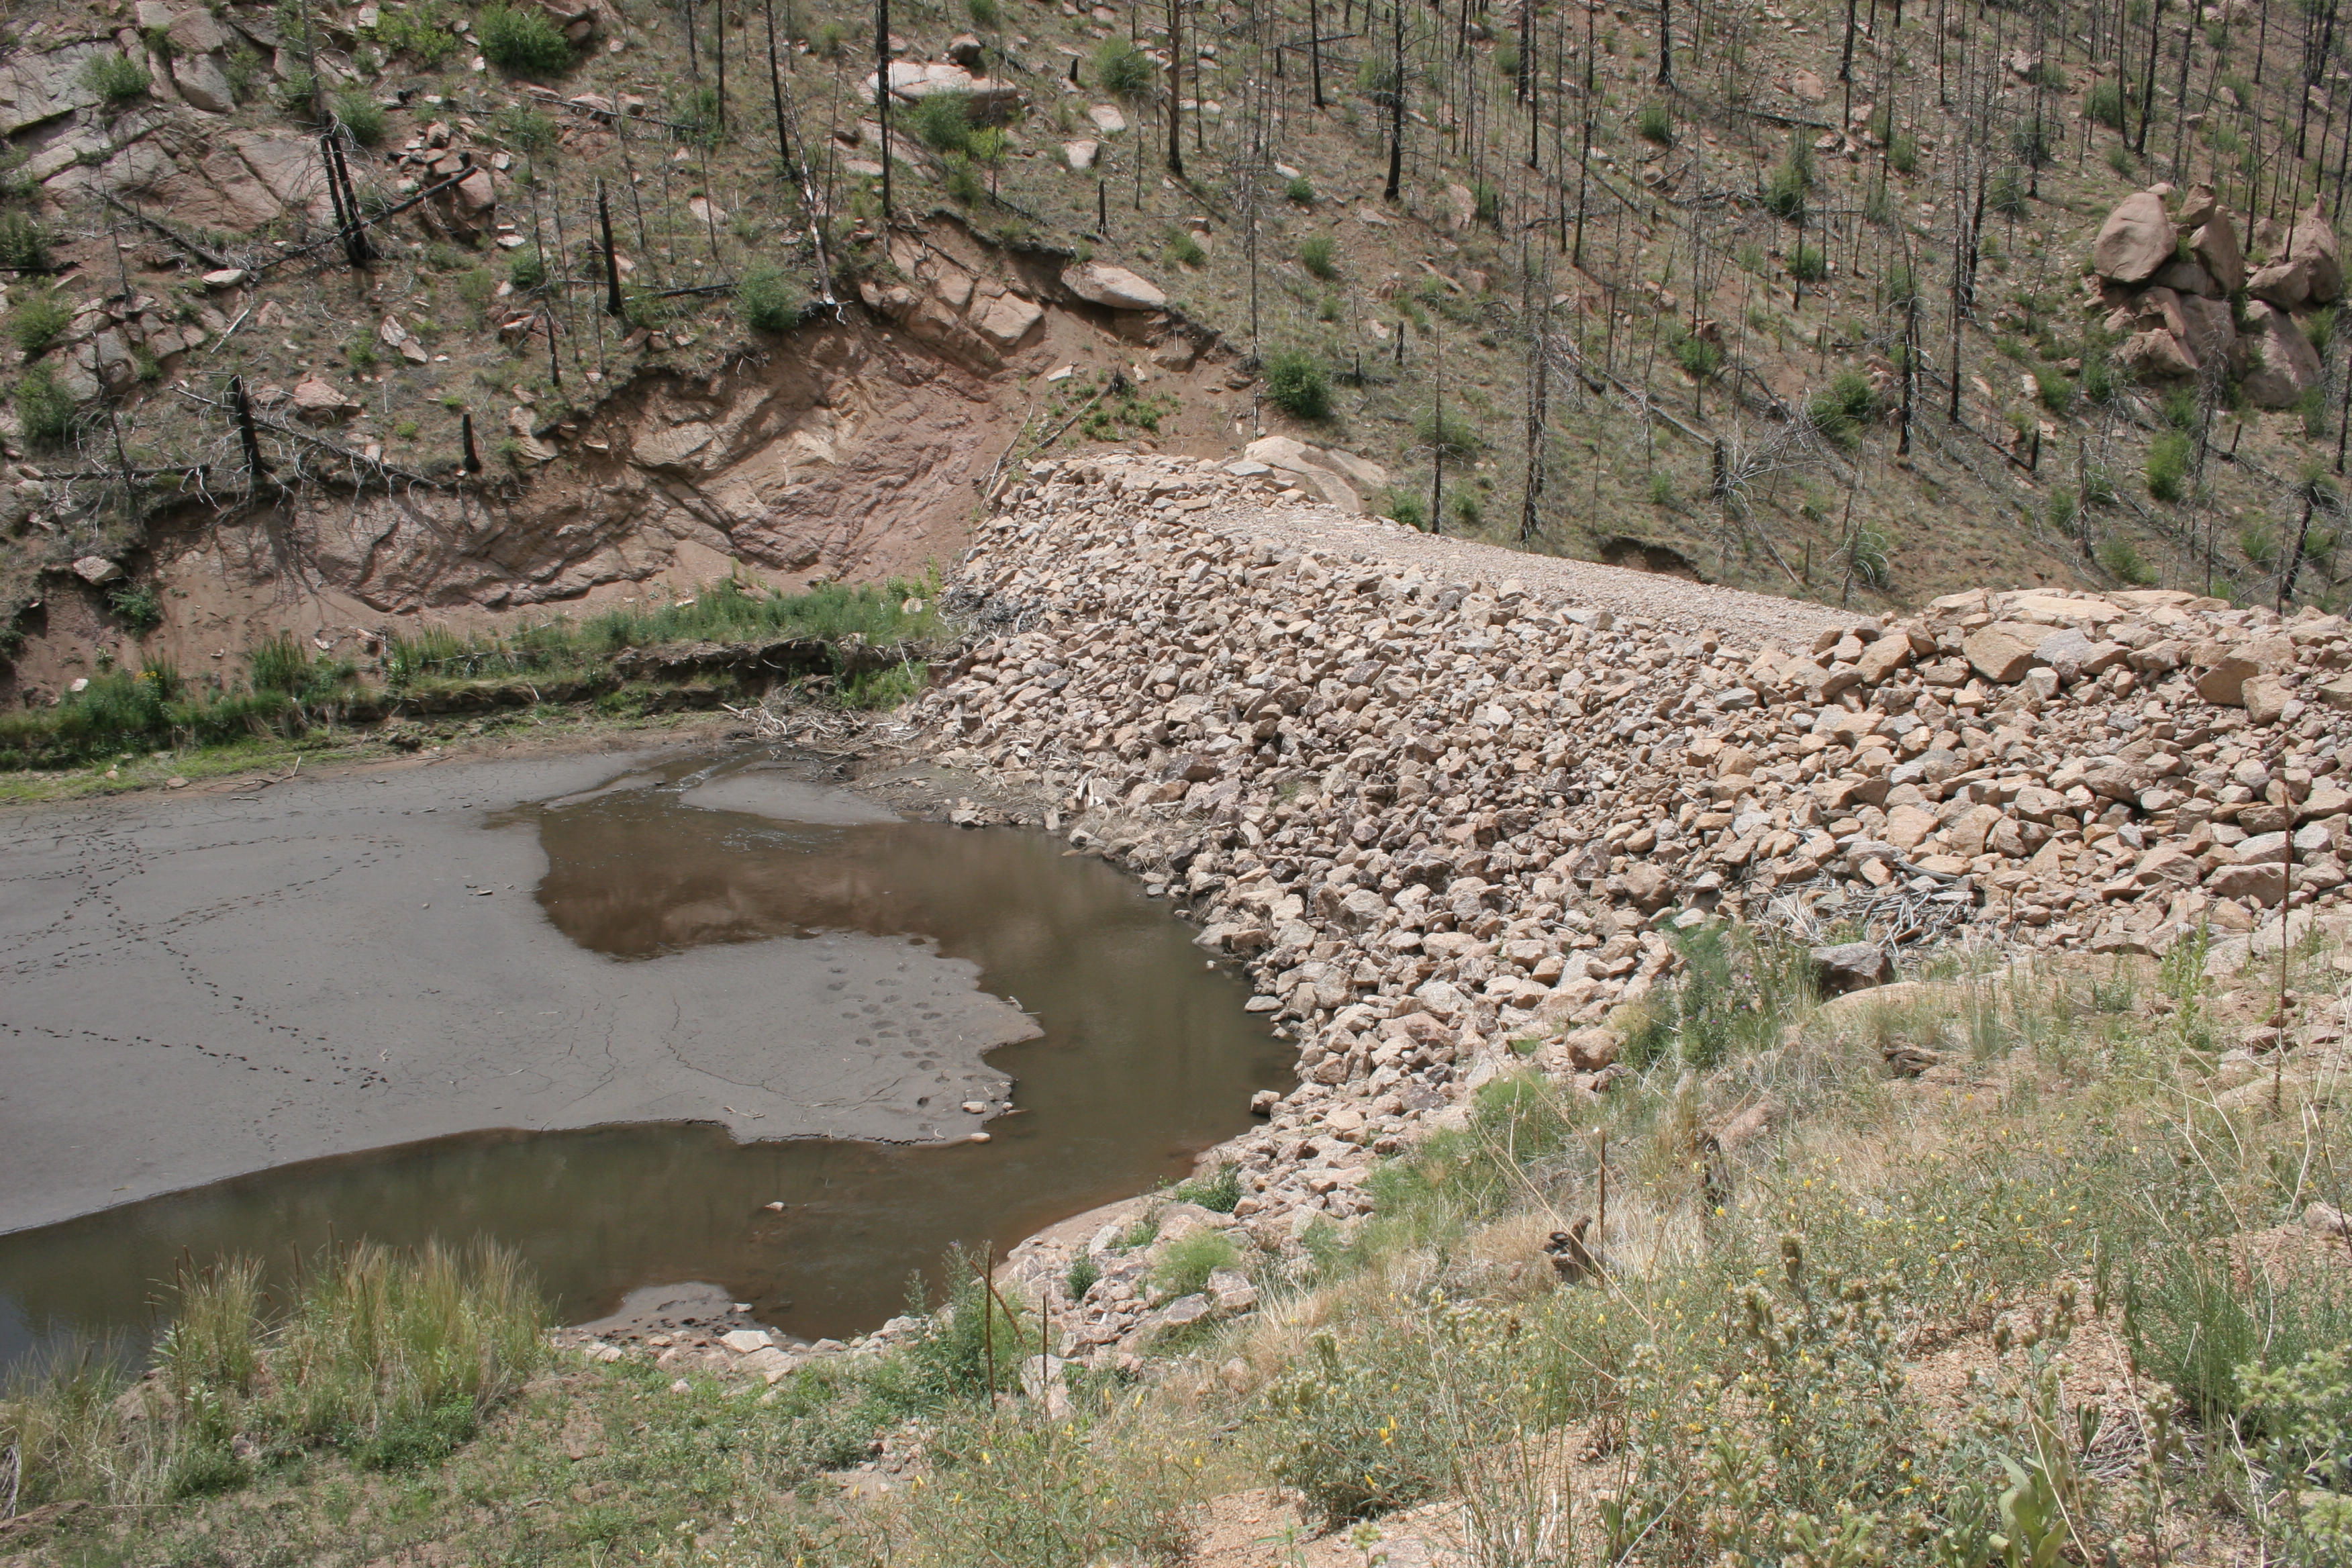 Following the Hayman Fire, Denver Water built large sediment traps to capture ash, sand and other debris from Turkey and Goose creeks, preventing that material from entering the reservoir.